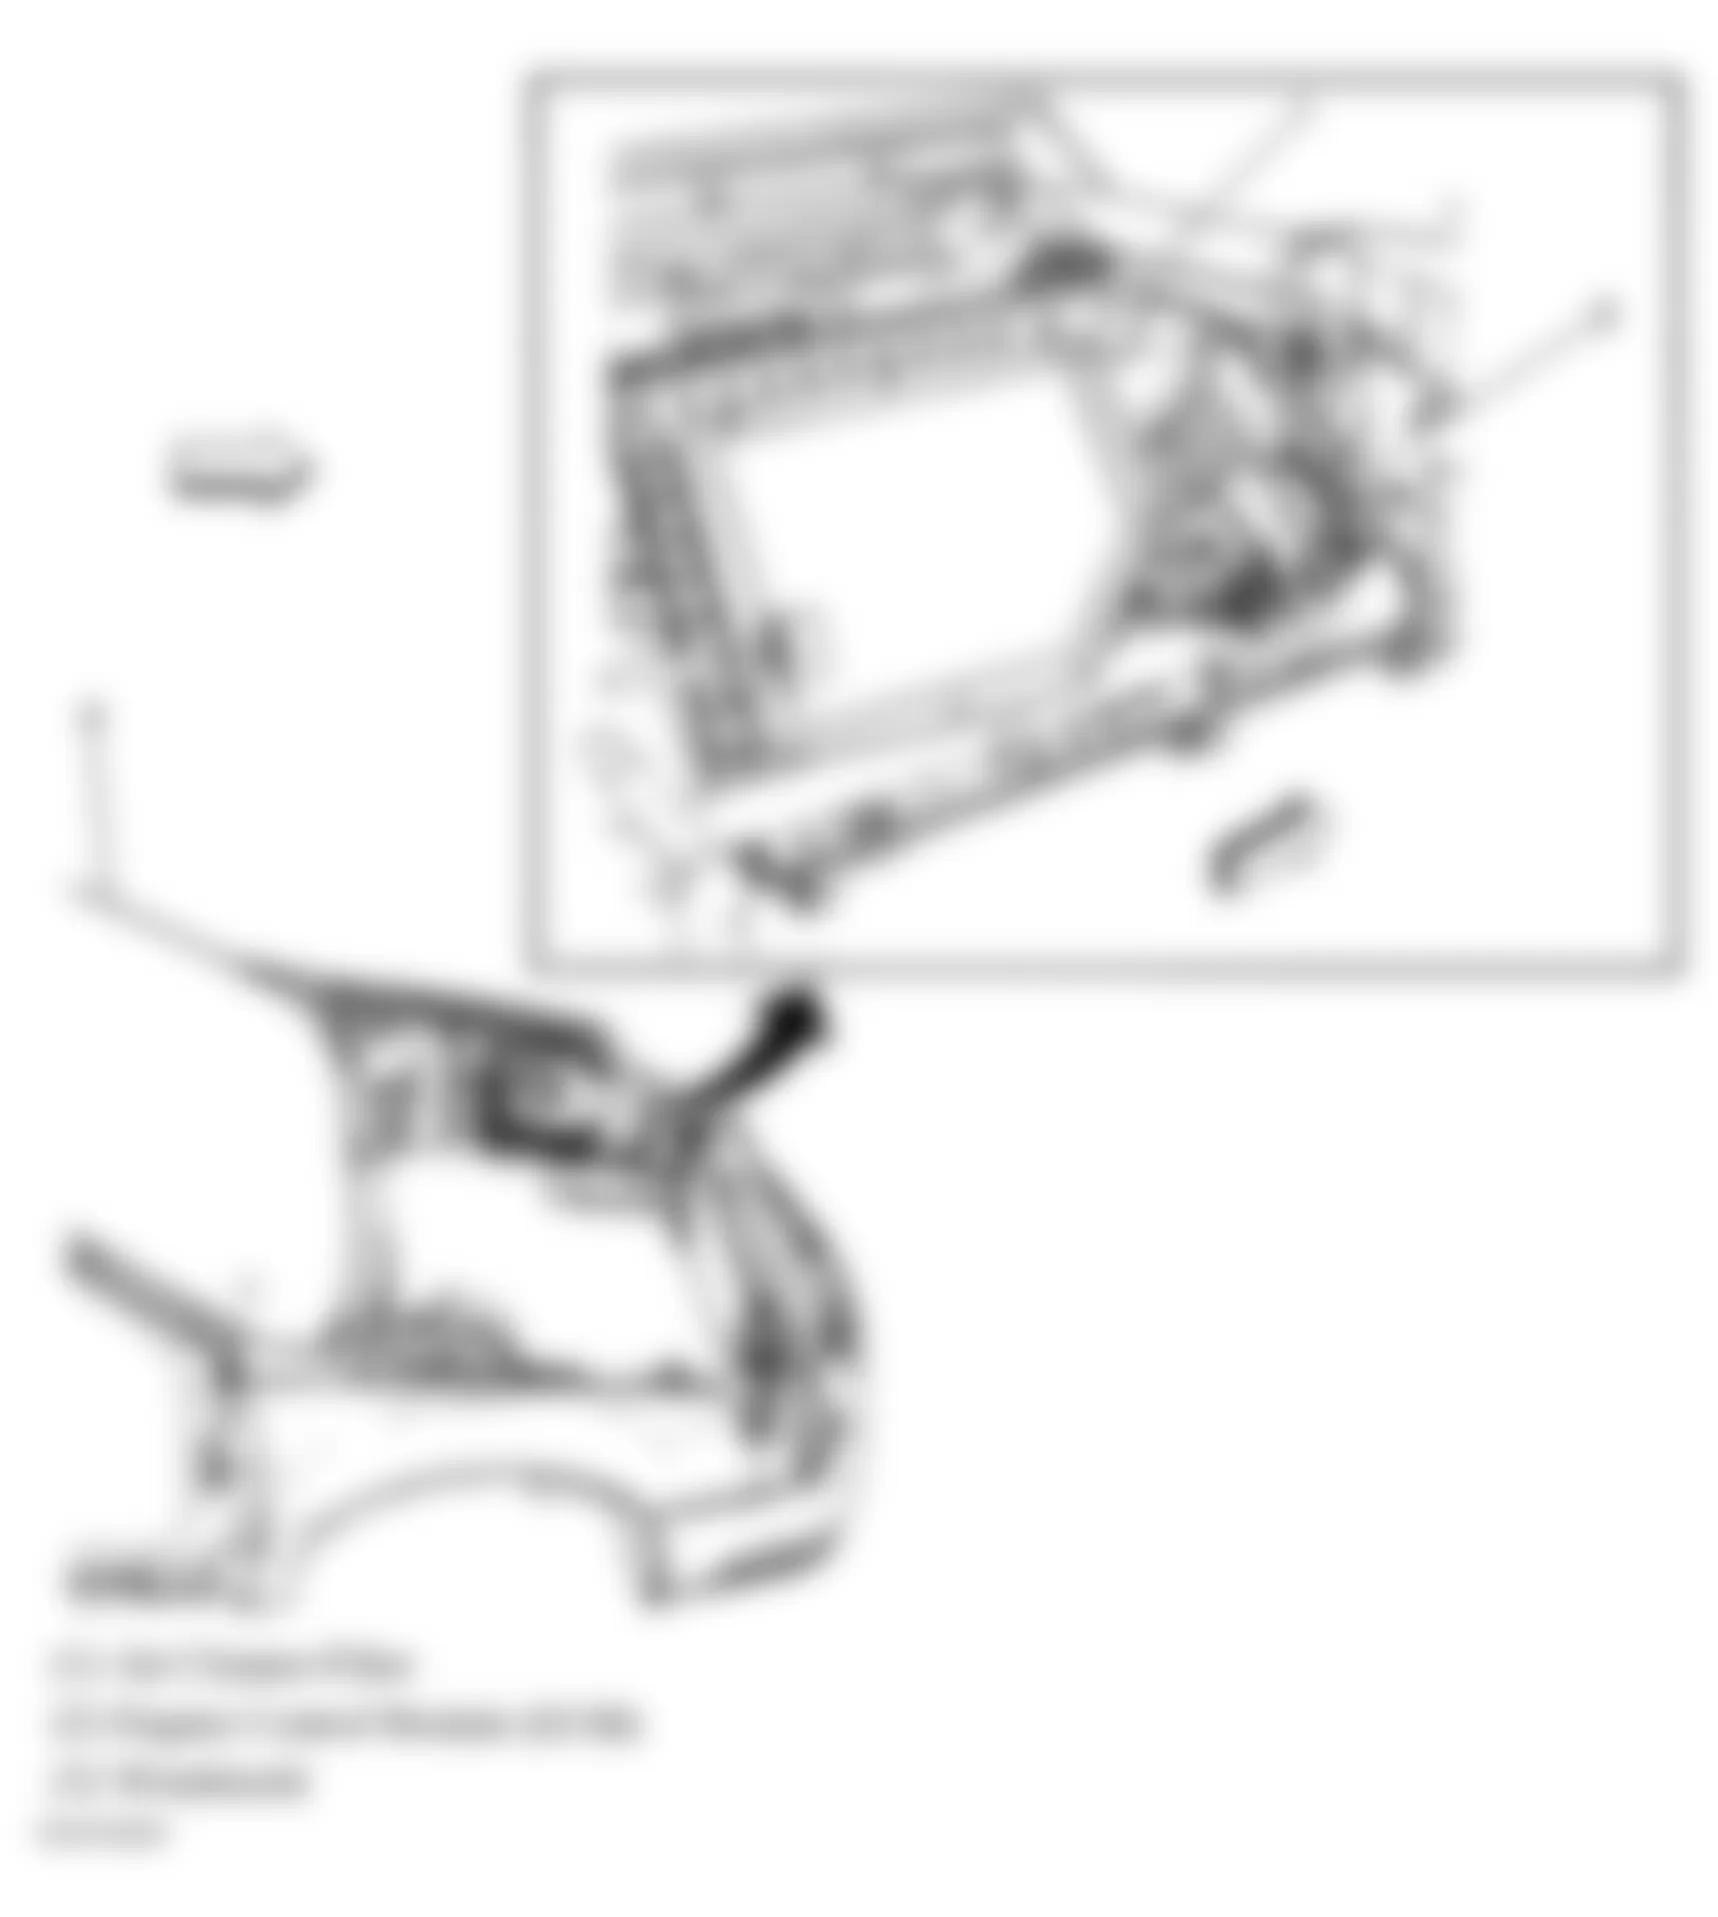 Buick Lucerne CXL 2006 - Component Locations -  Engine Compartment